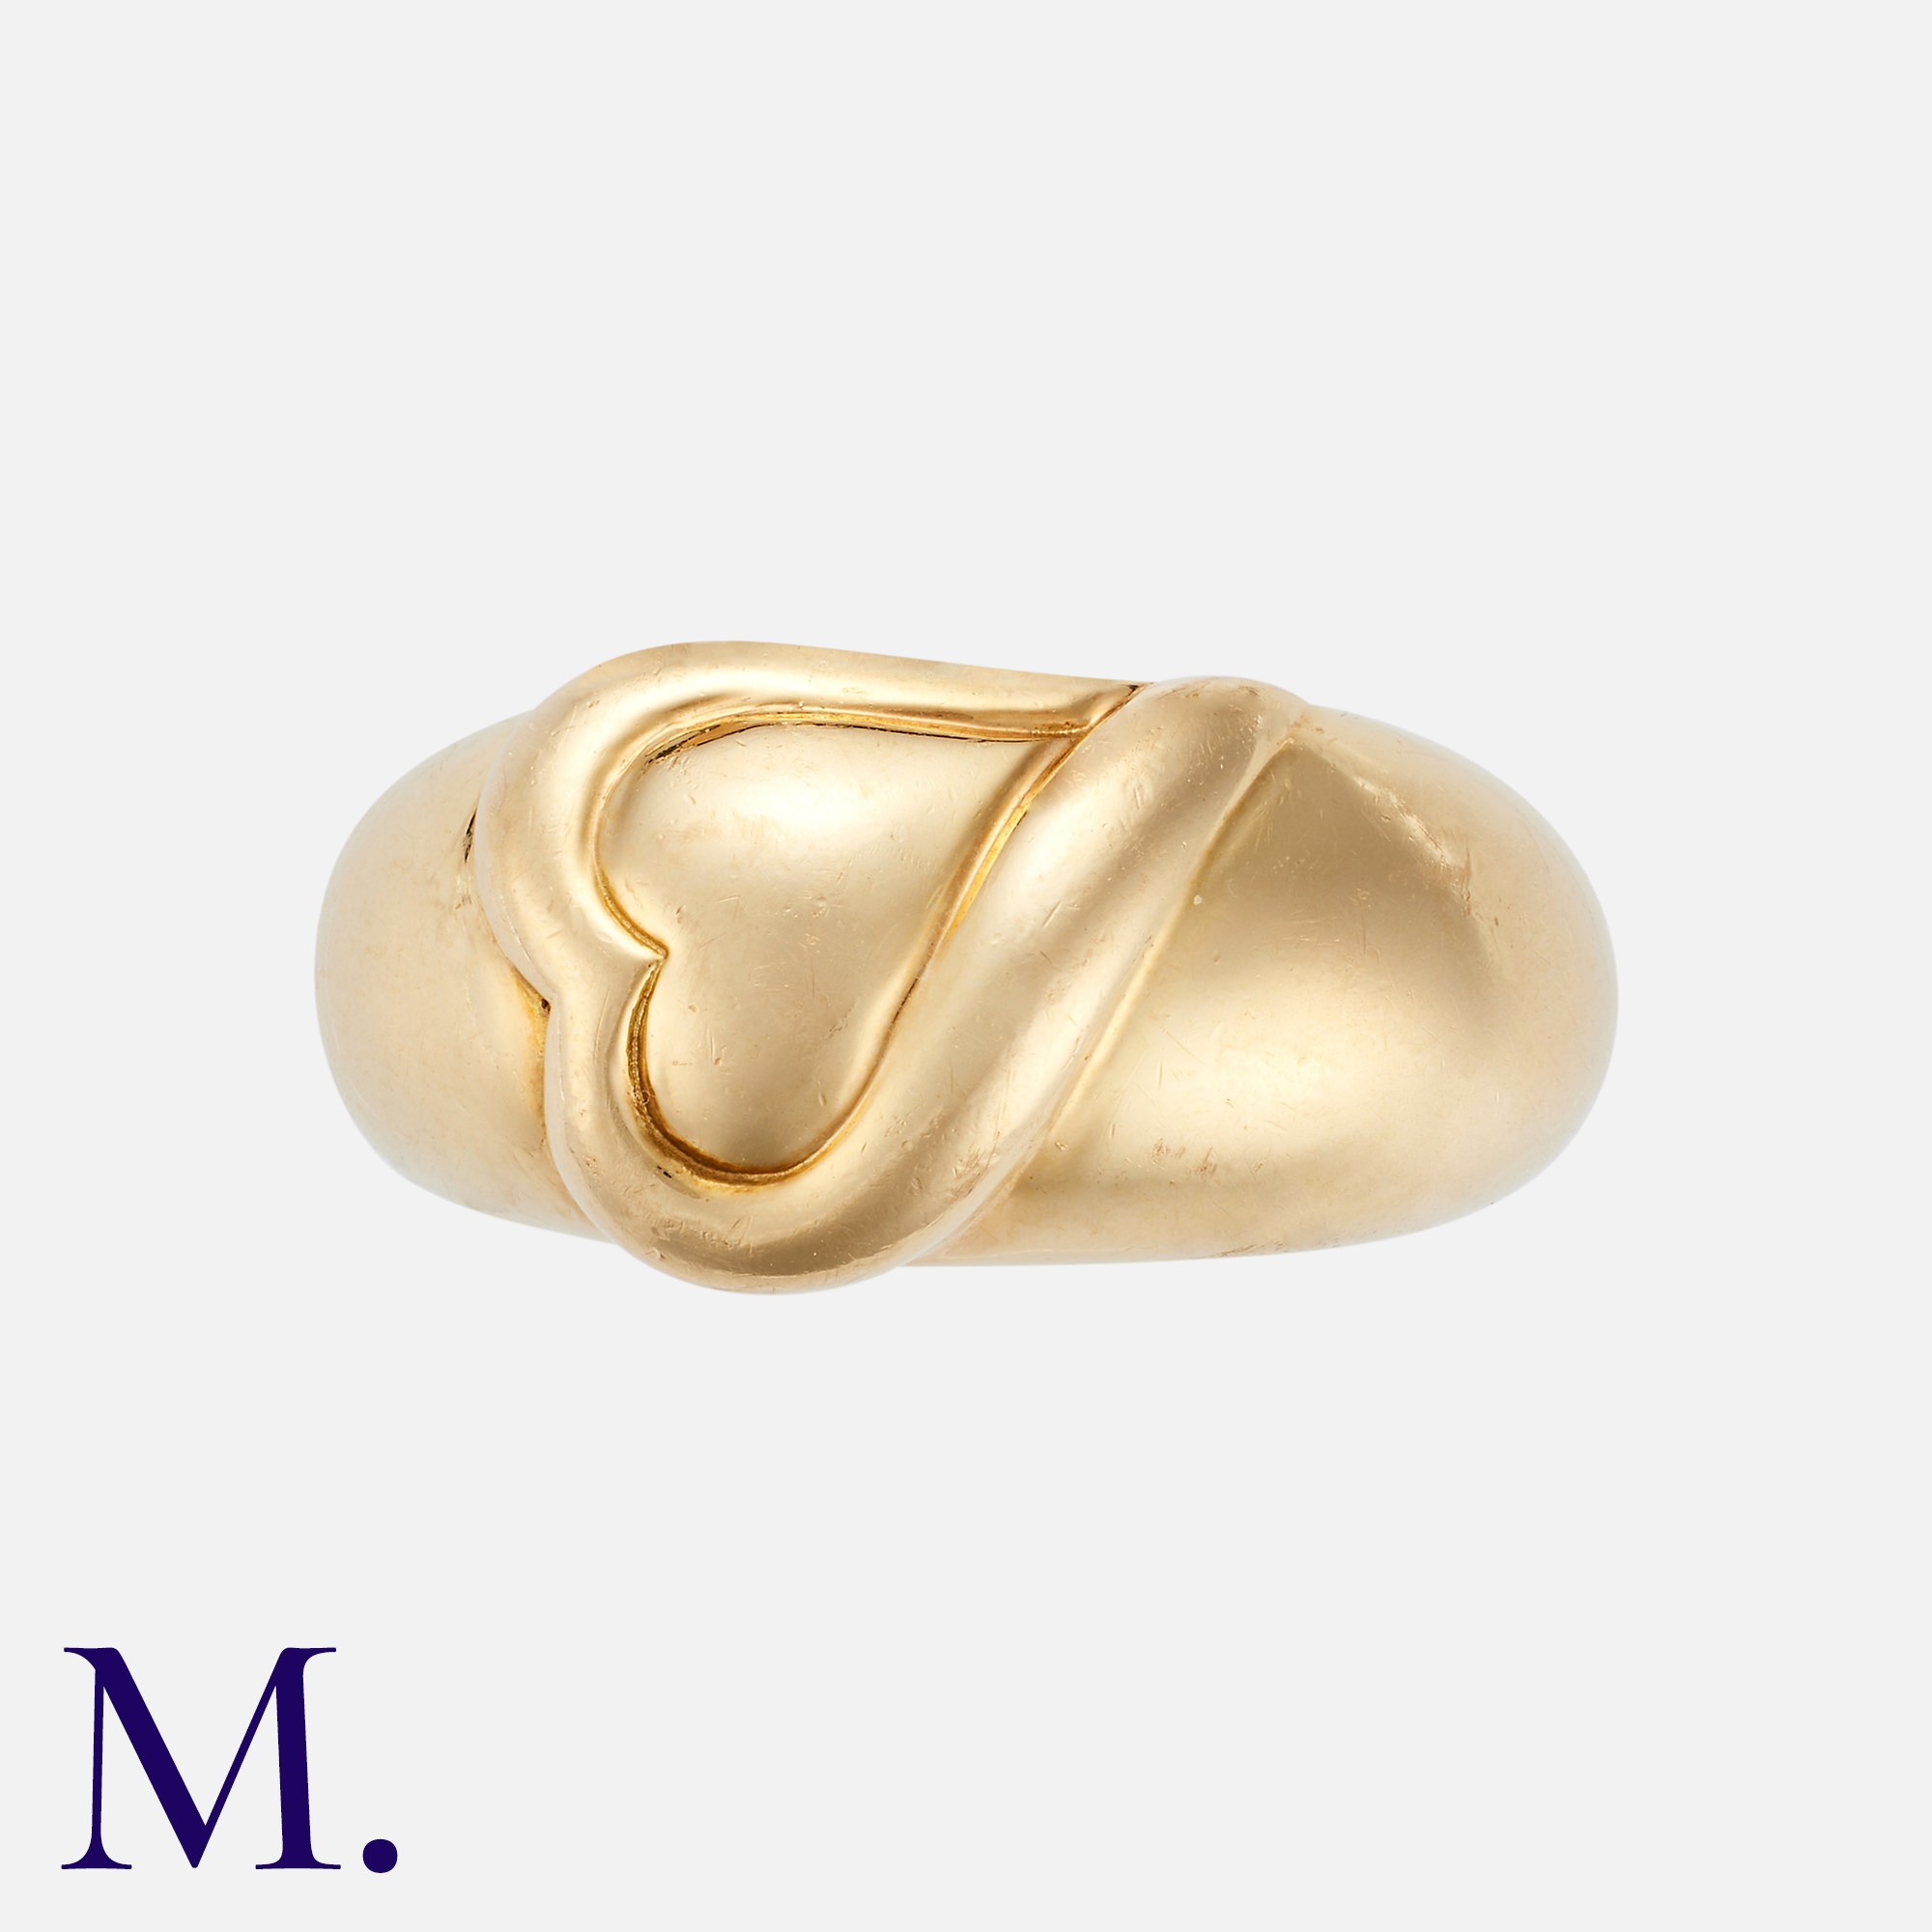 BOUCHERON. A Heart Ring in 18K yellow gold with elongated heart design to the front. Signed